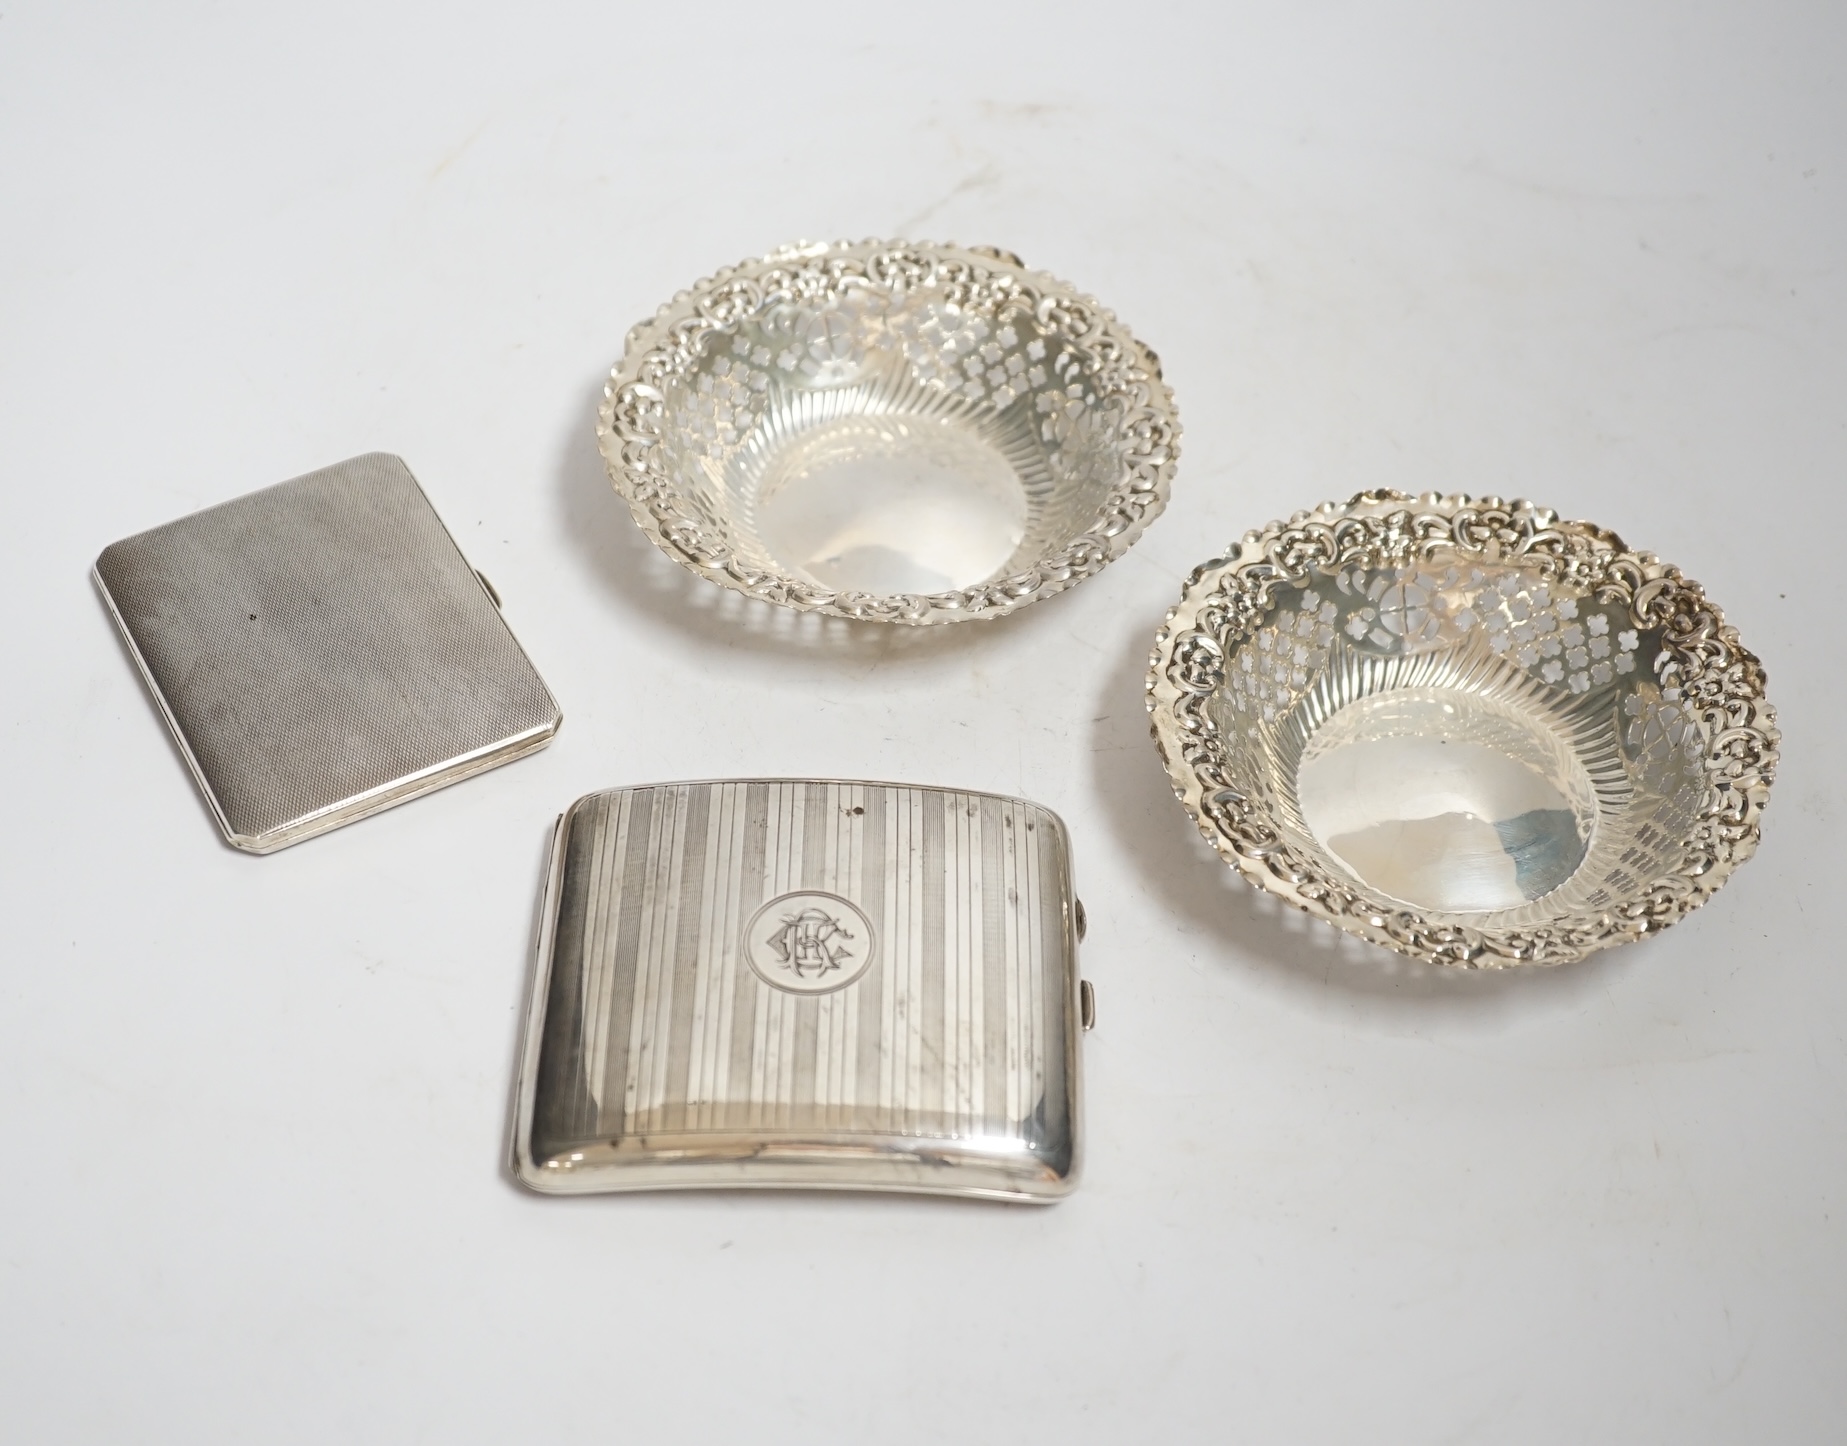 A pair of late Victorian pierced silver bonbon dishes, Birmingham, 1896, diameter 11.1cm, together with two silver cigarette cases.